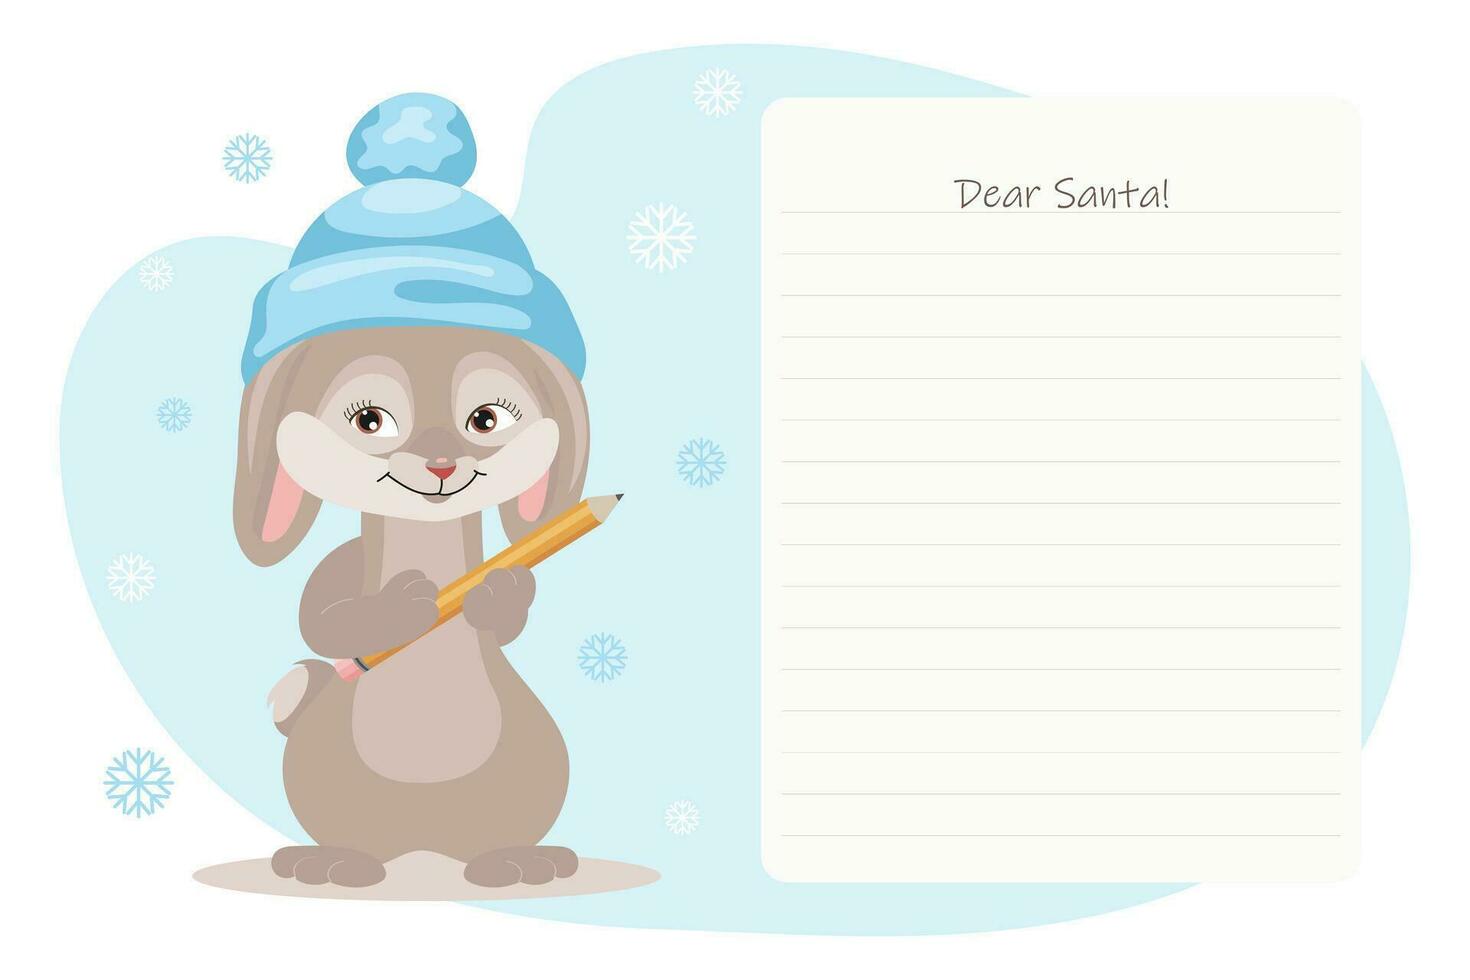 Letter template to Santa. A cute bunny in a hat with a pencil writes a letter to Santa. Cartoon illustration in flat style. Vector